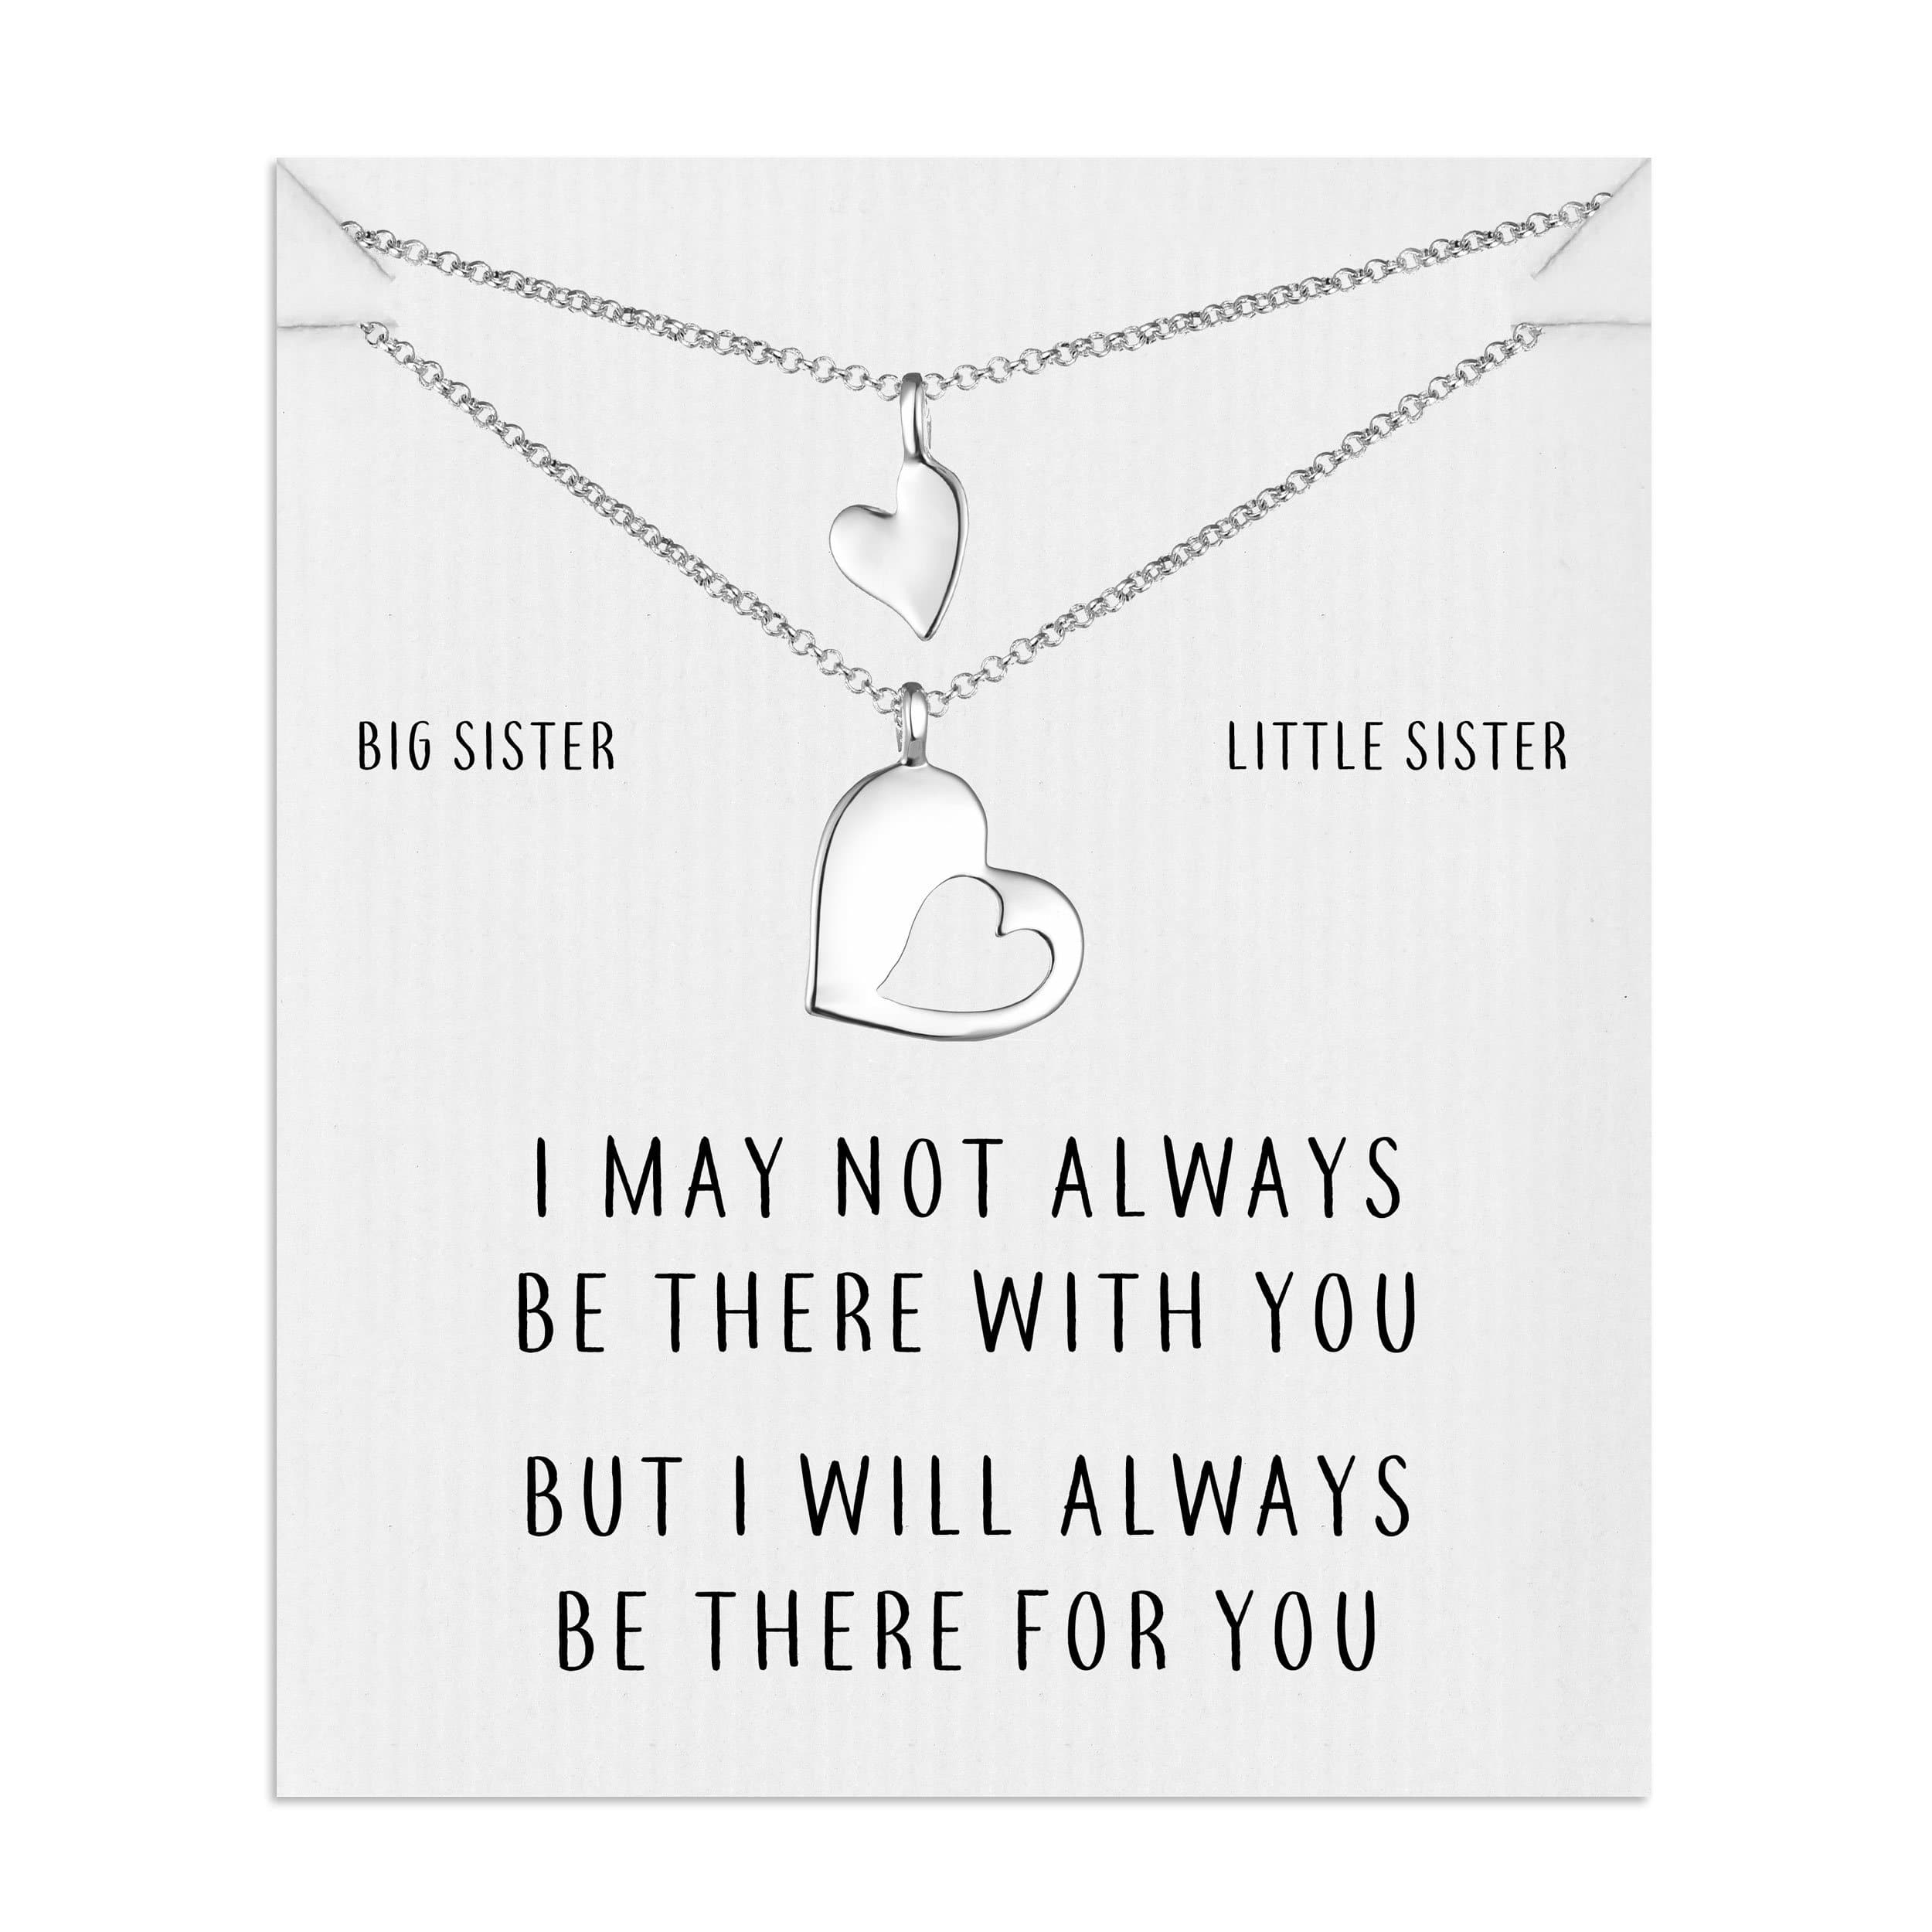 Big Sister Little Sister Piece of My Heart Necklace Set by Philip Jones Jewellery